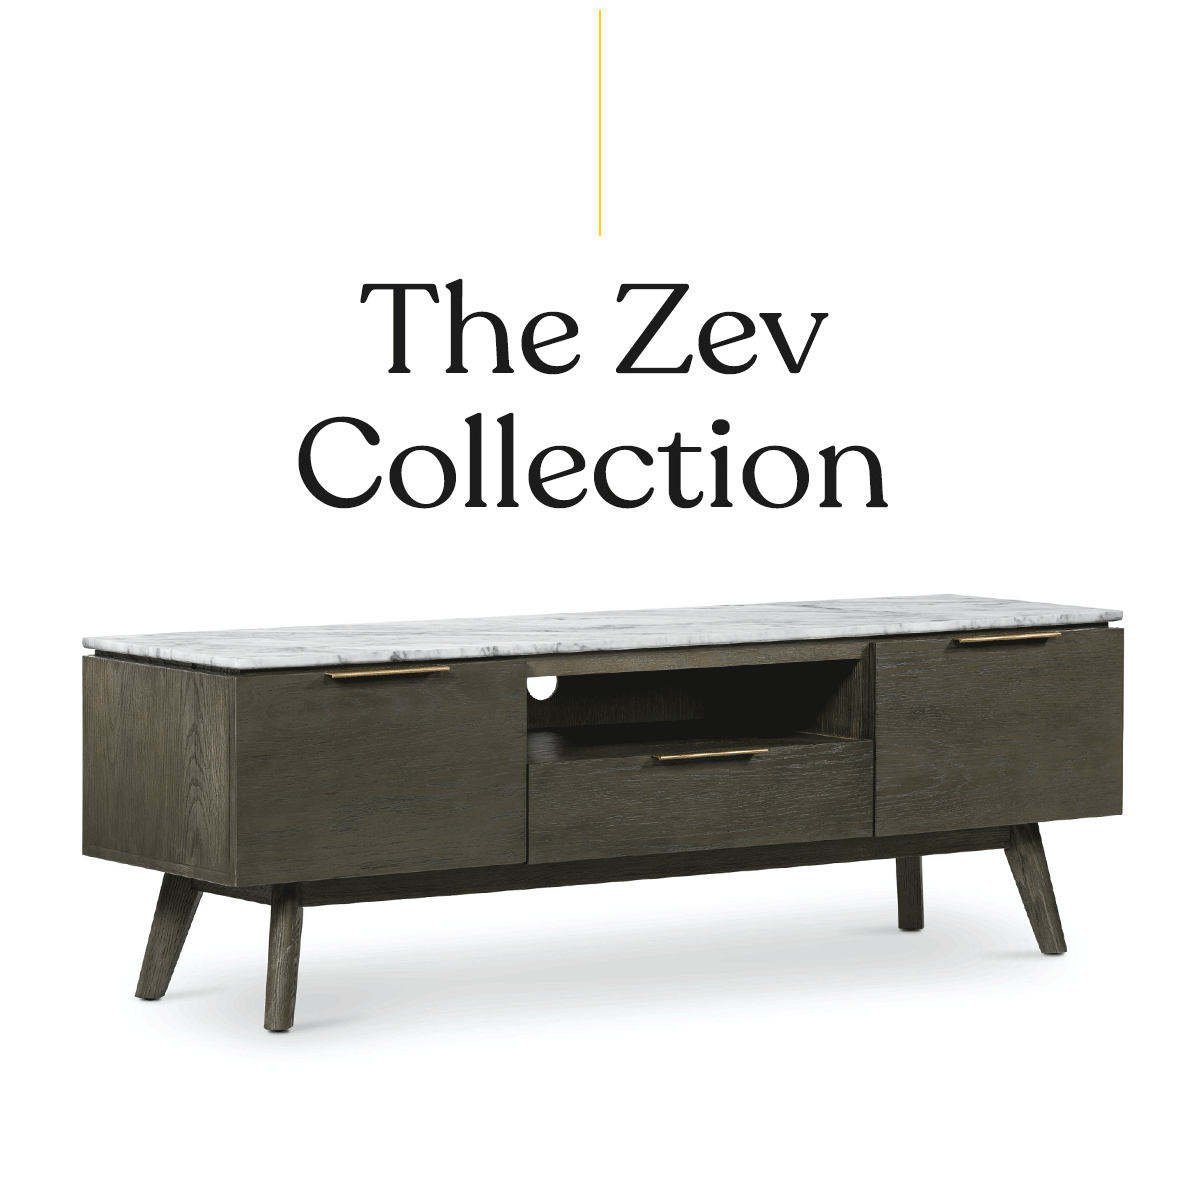 The Zev Collection